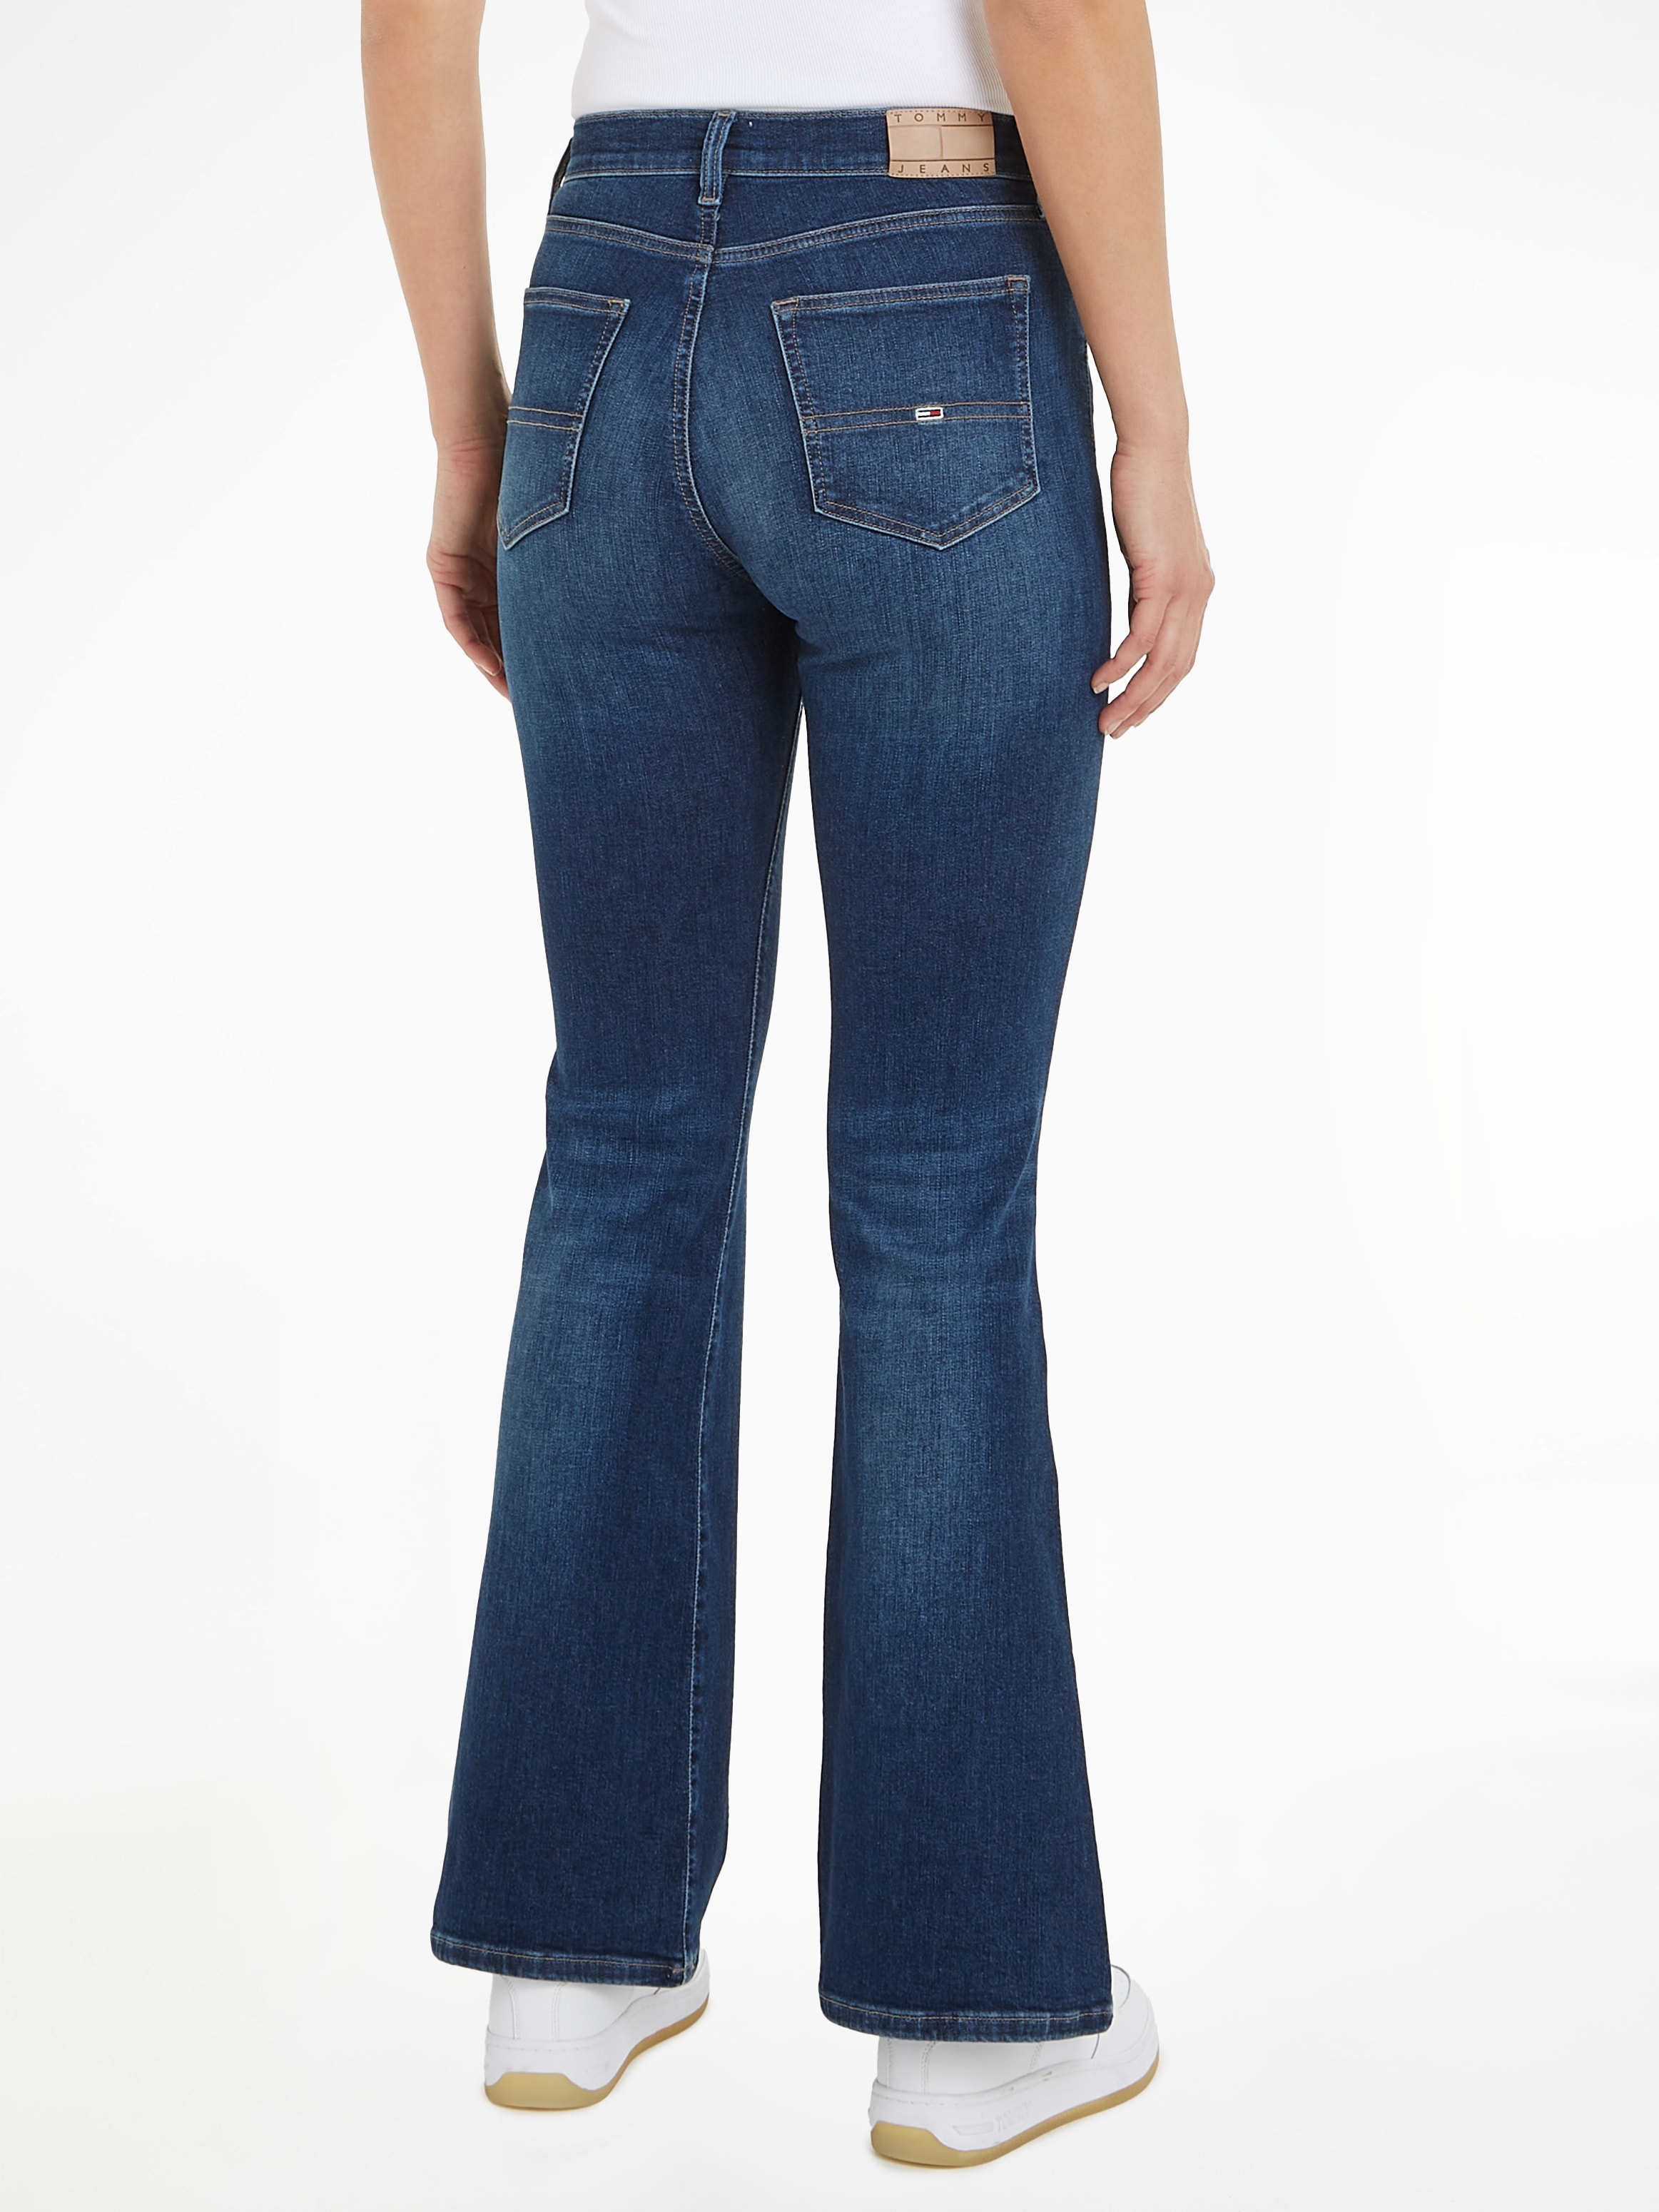 Bequeme Jeans walking Jeans »Sylvia«, I\'m | Markenlabel Tommy mit